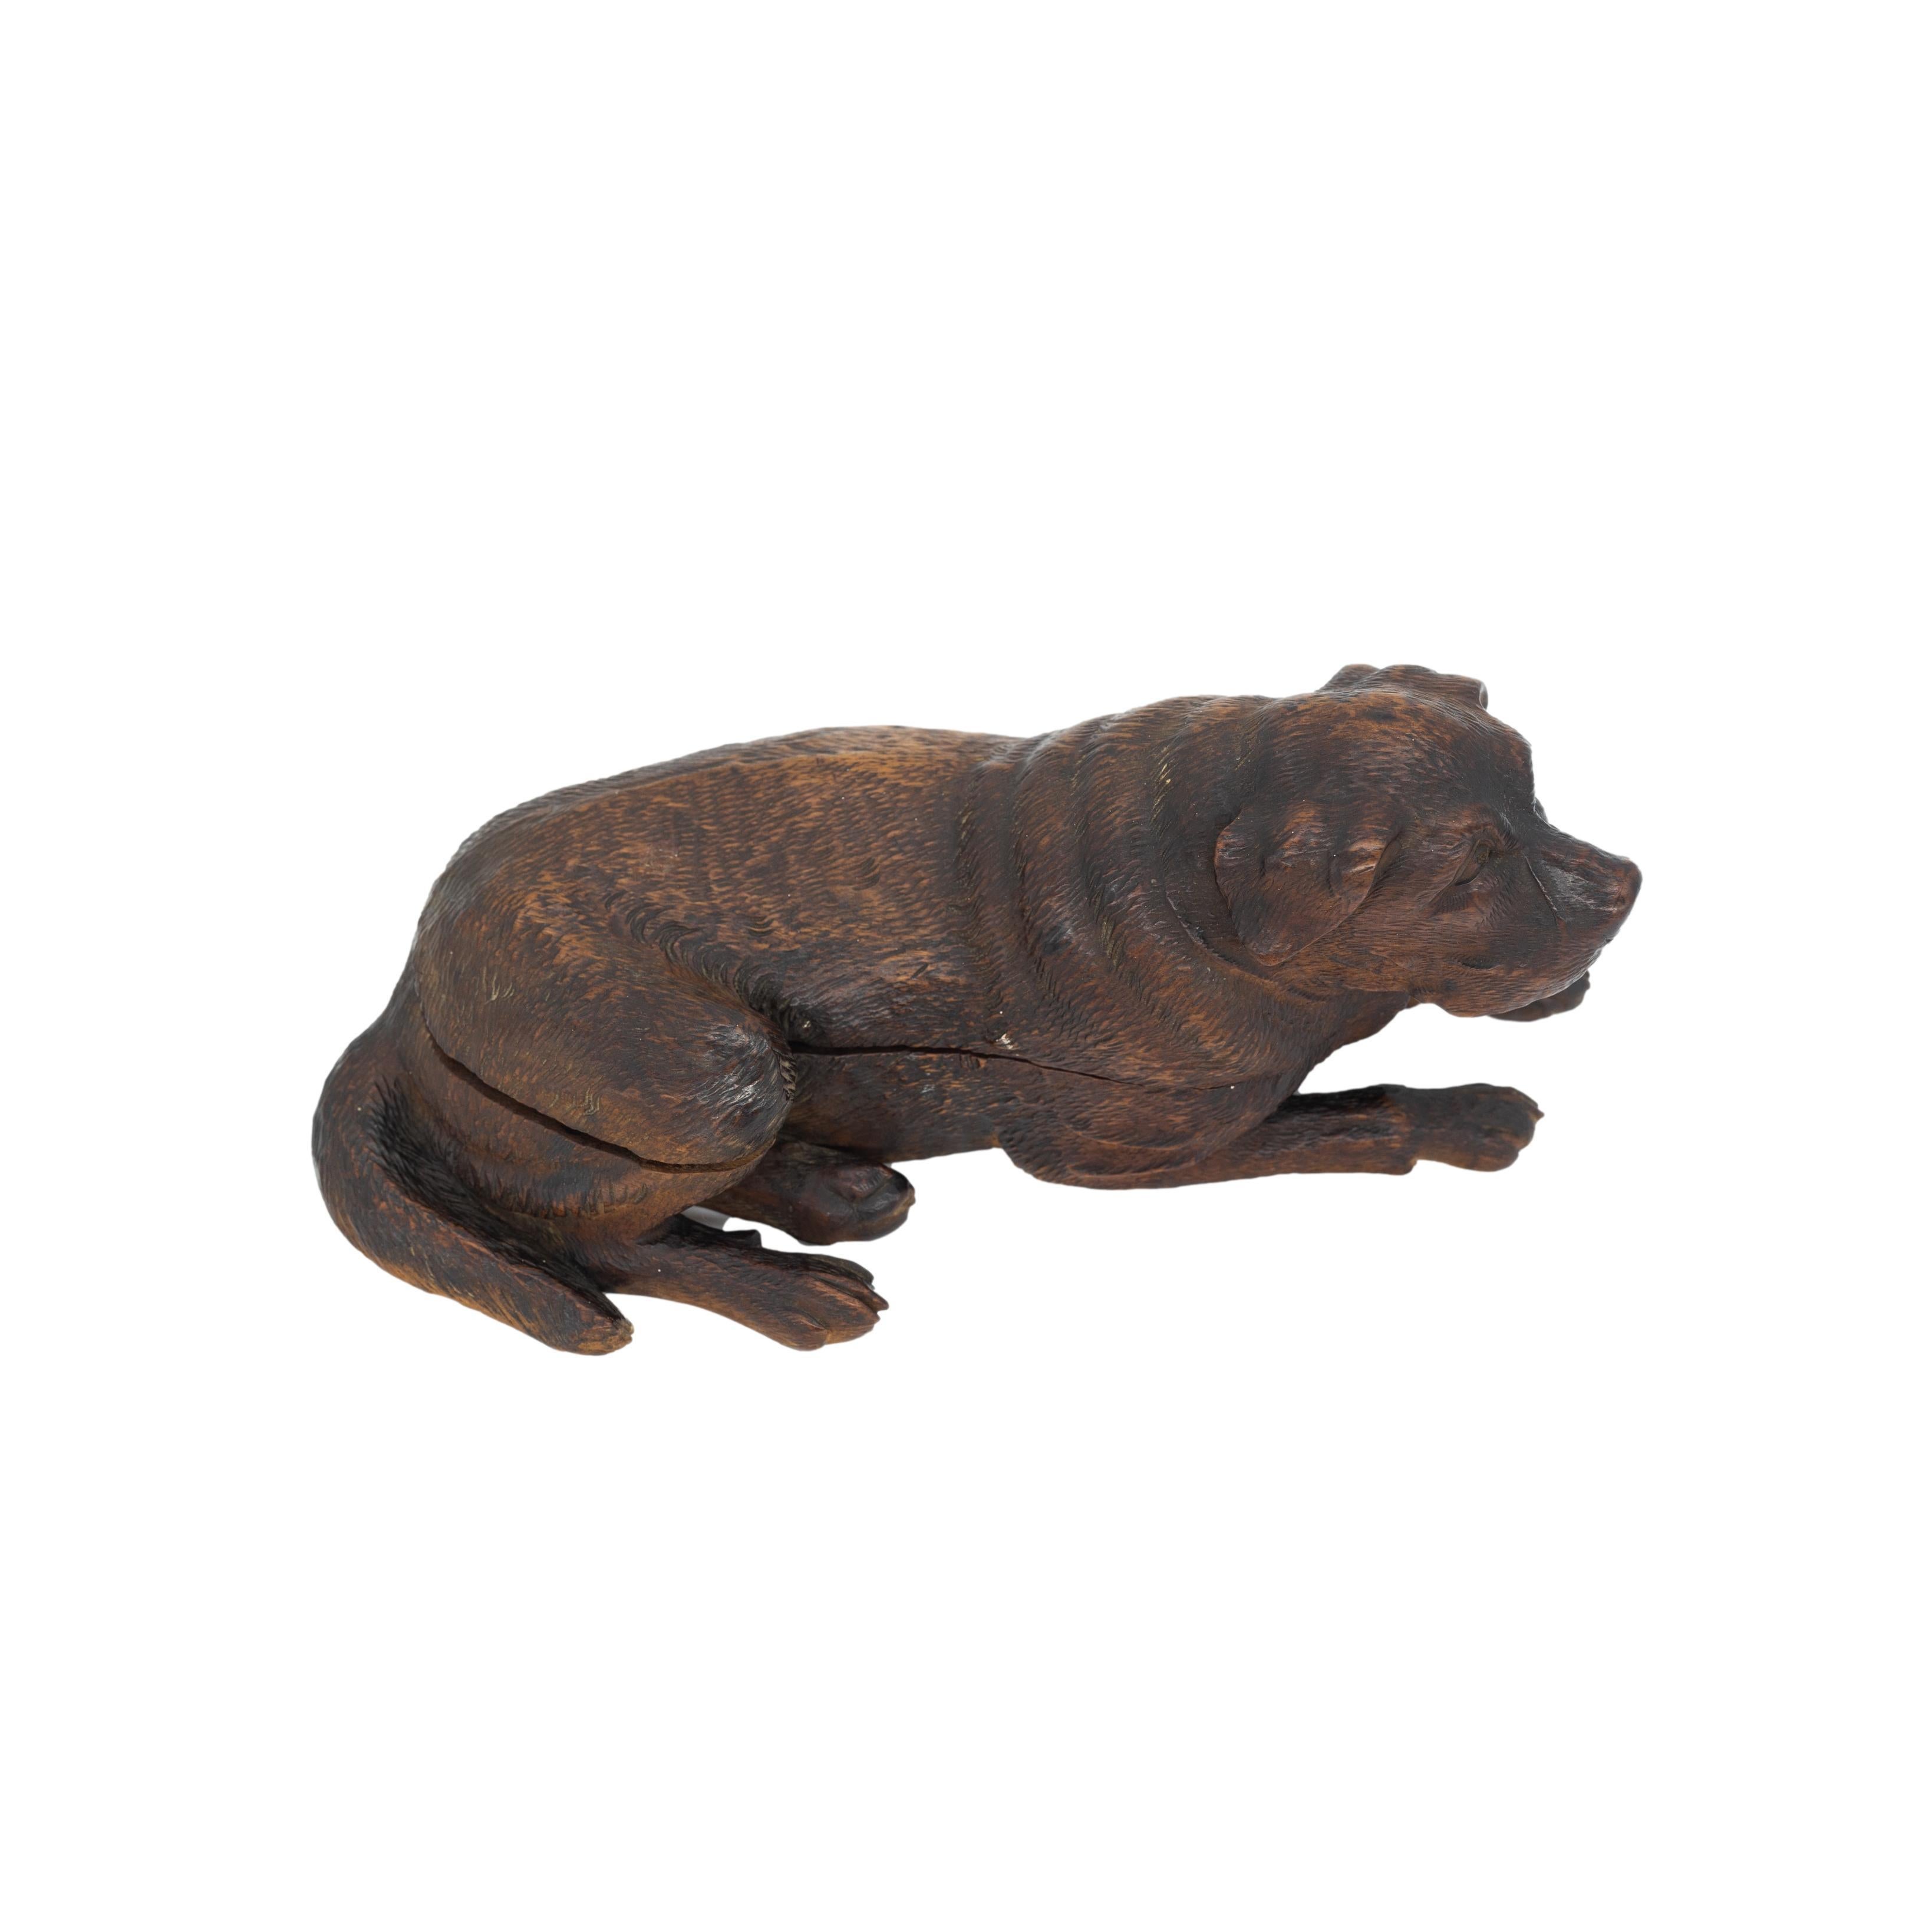 Black Forest Breinzware Walnut Inkwell, carved as a reclining Swiss Mountain Dog, with a hinged top, and two interior glass inkwells, Brienz, Switzerland ca. 1880.  Beautifully detailed and finely carved.  

Jay Arenski, et al, quotes Swiss Poet